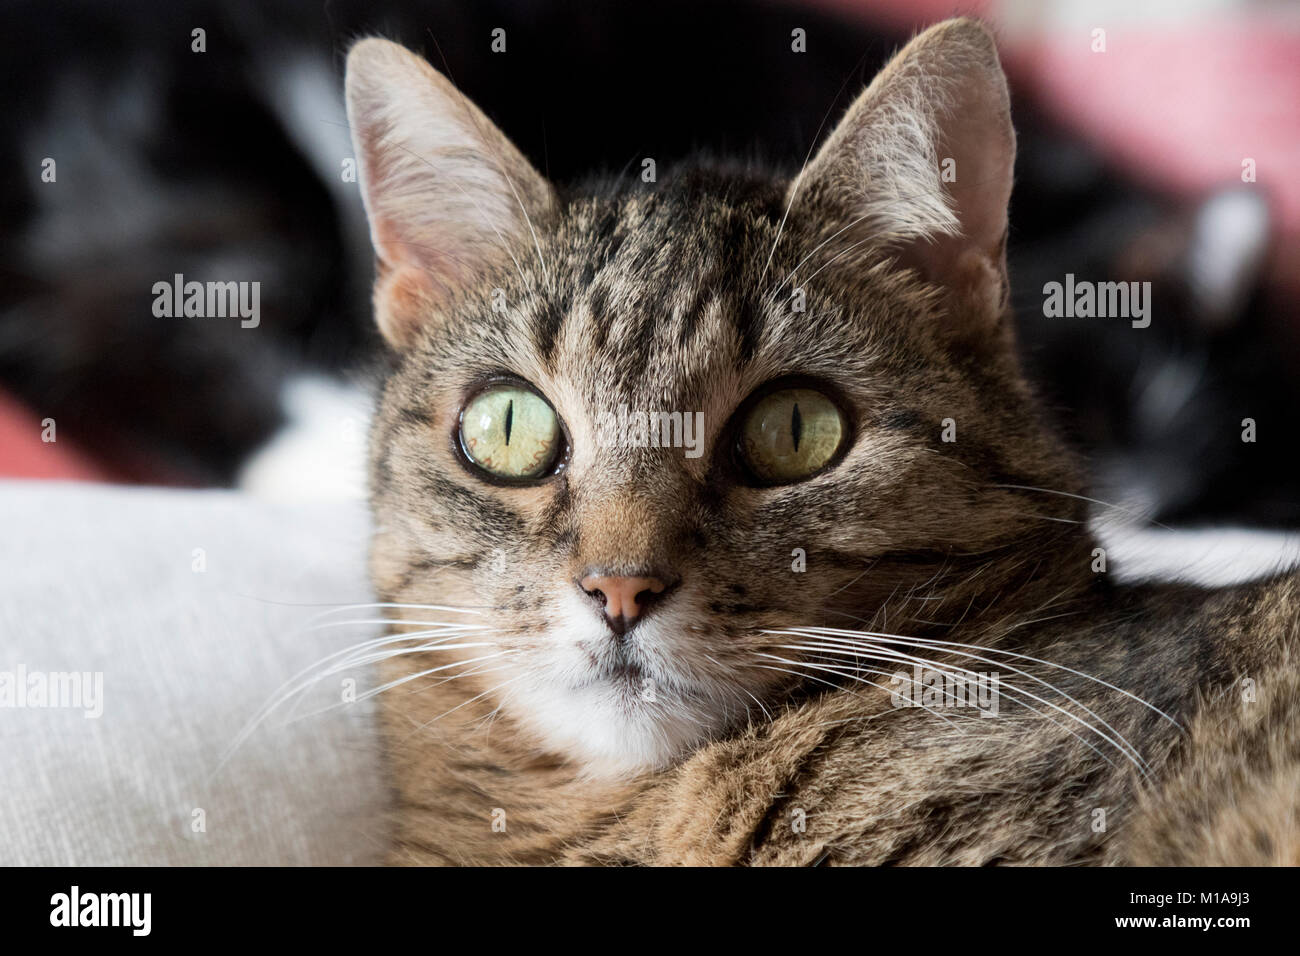 Close up of alert cat with ears perked up intently focusing ears forward